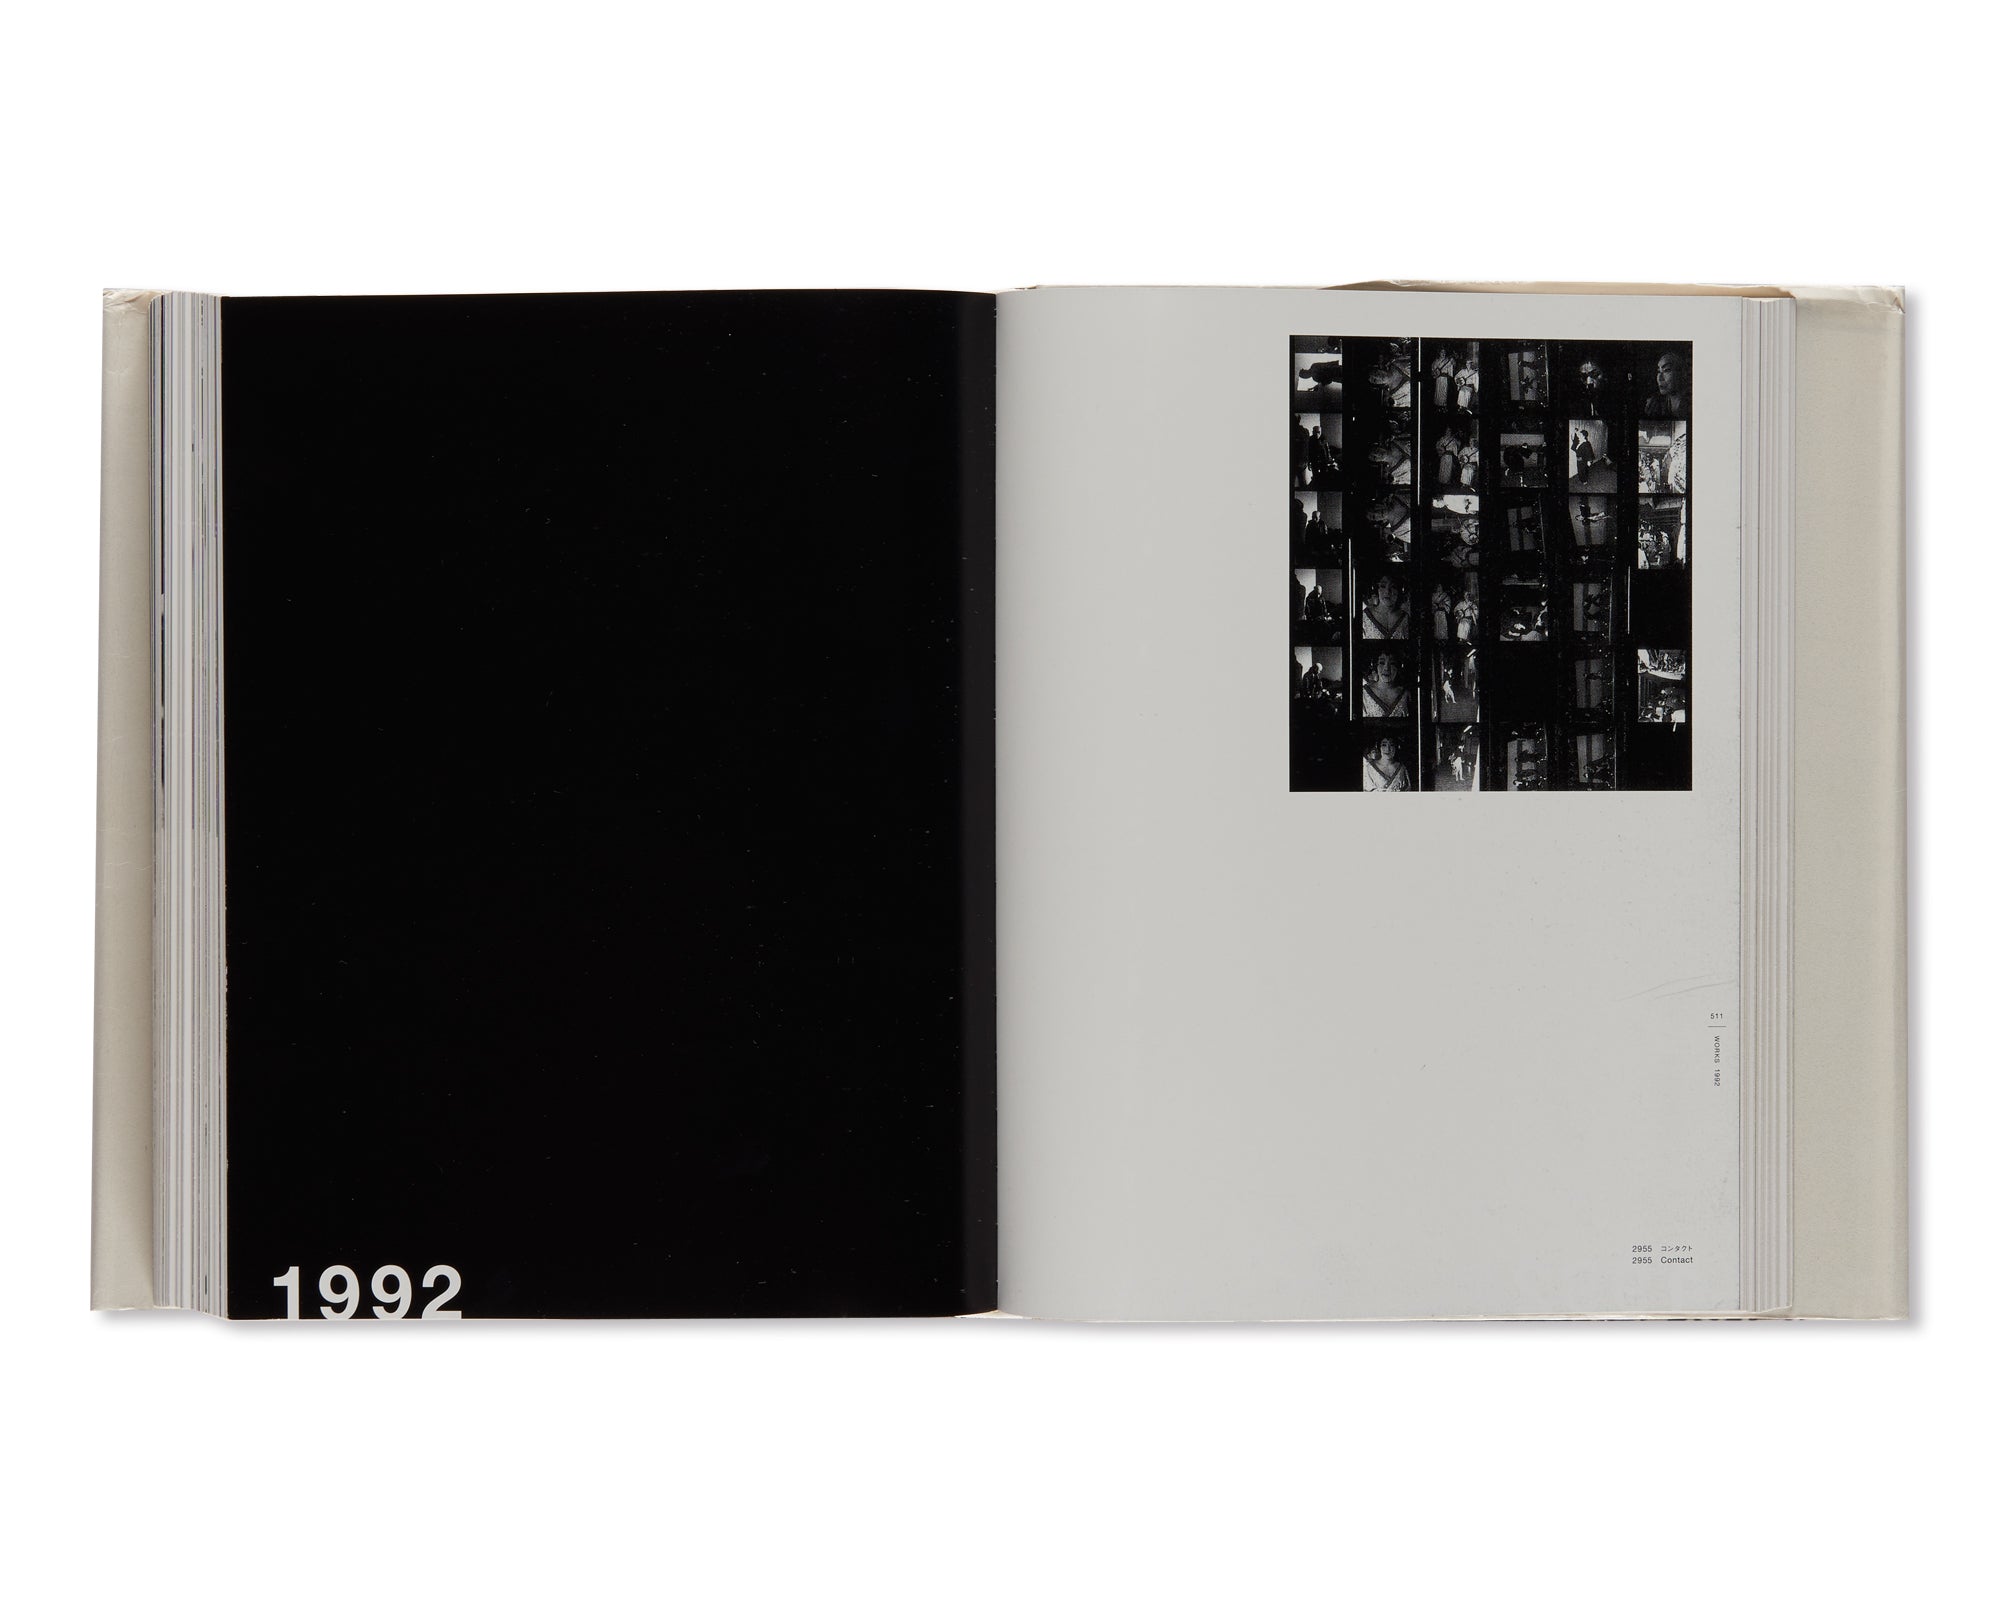 DAIDO MORIYAMA THE COMPLETE WORKS - A SET OF VOL. 1, 2, 3 AND 4 by